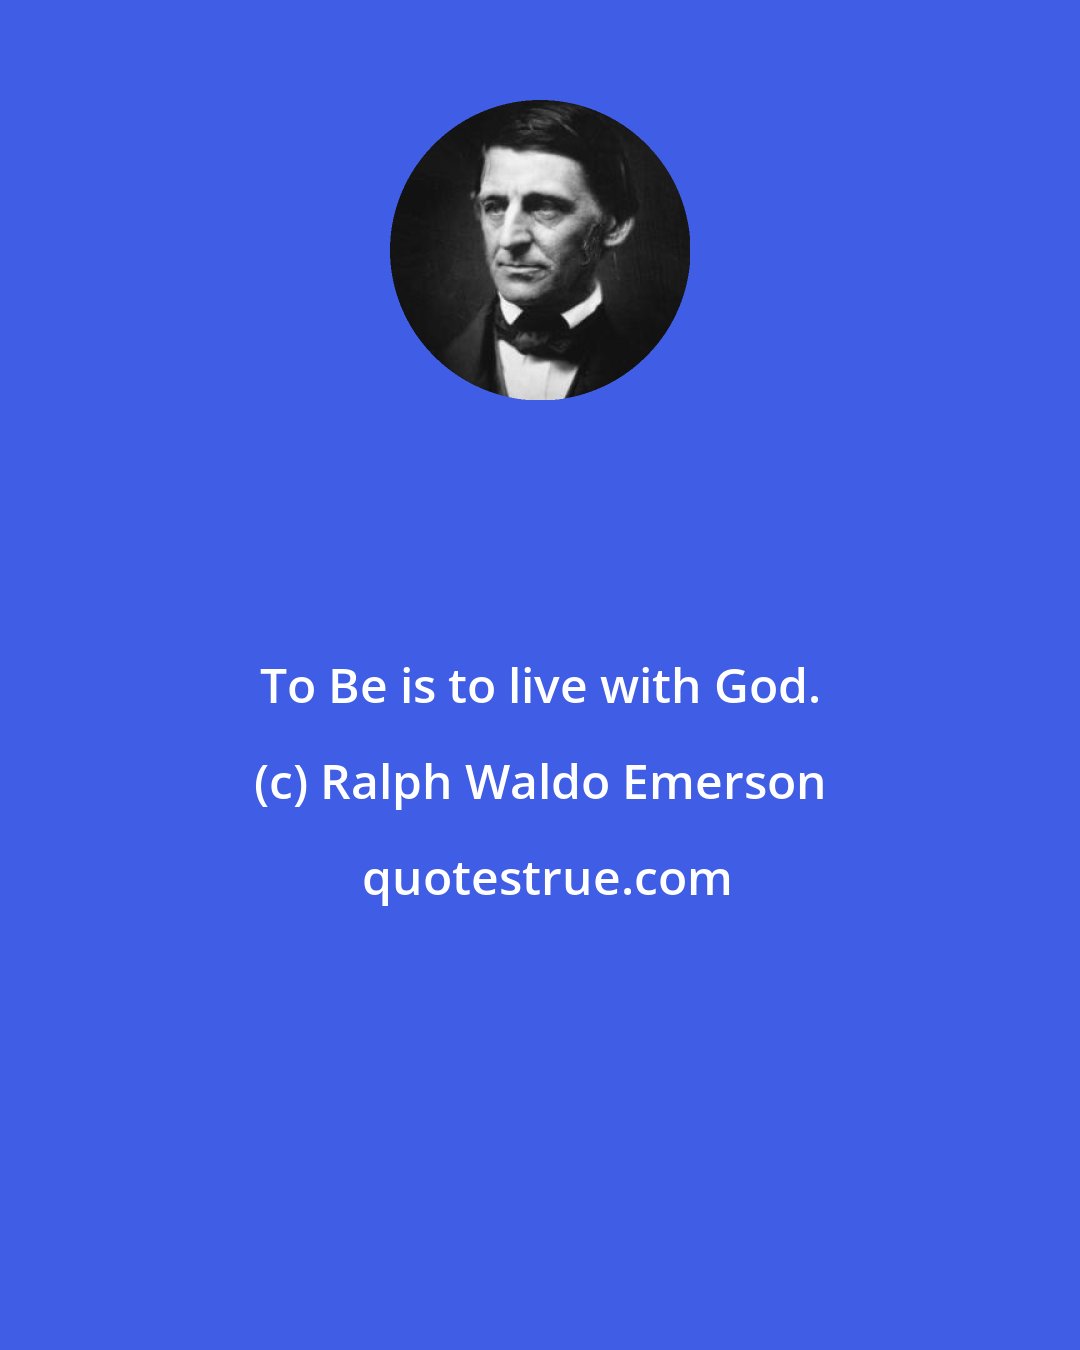 Ralph Waldo Emerson: To Be is to live with God.